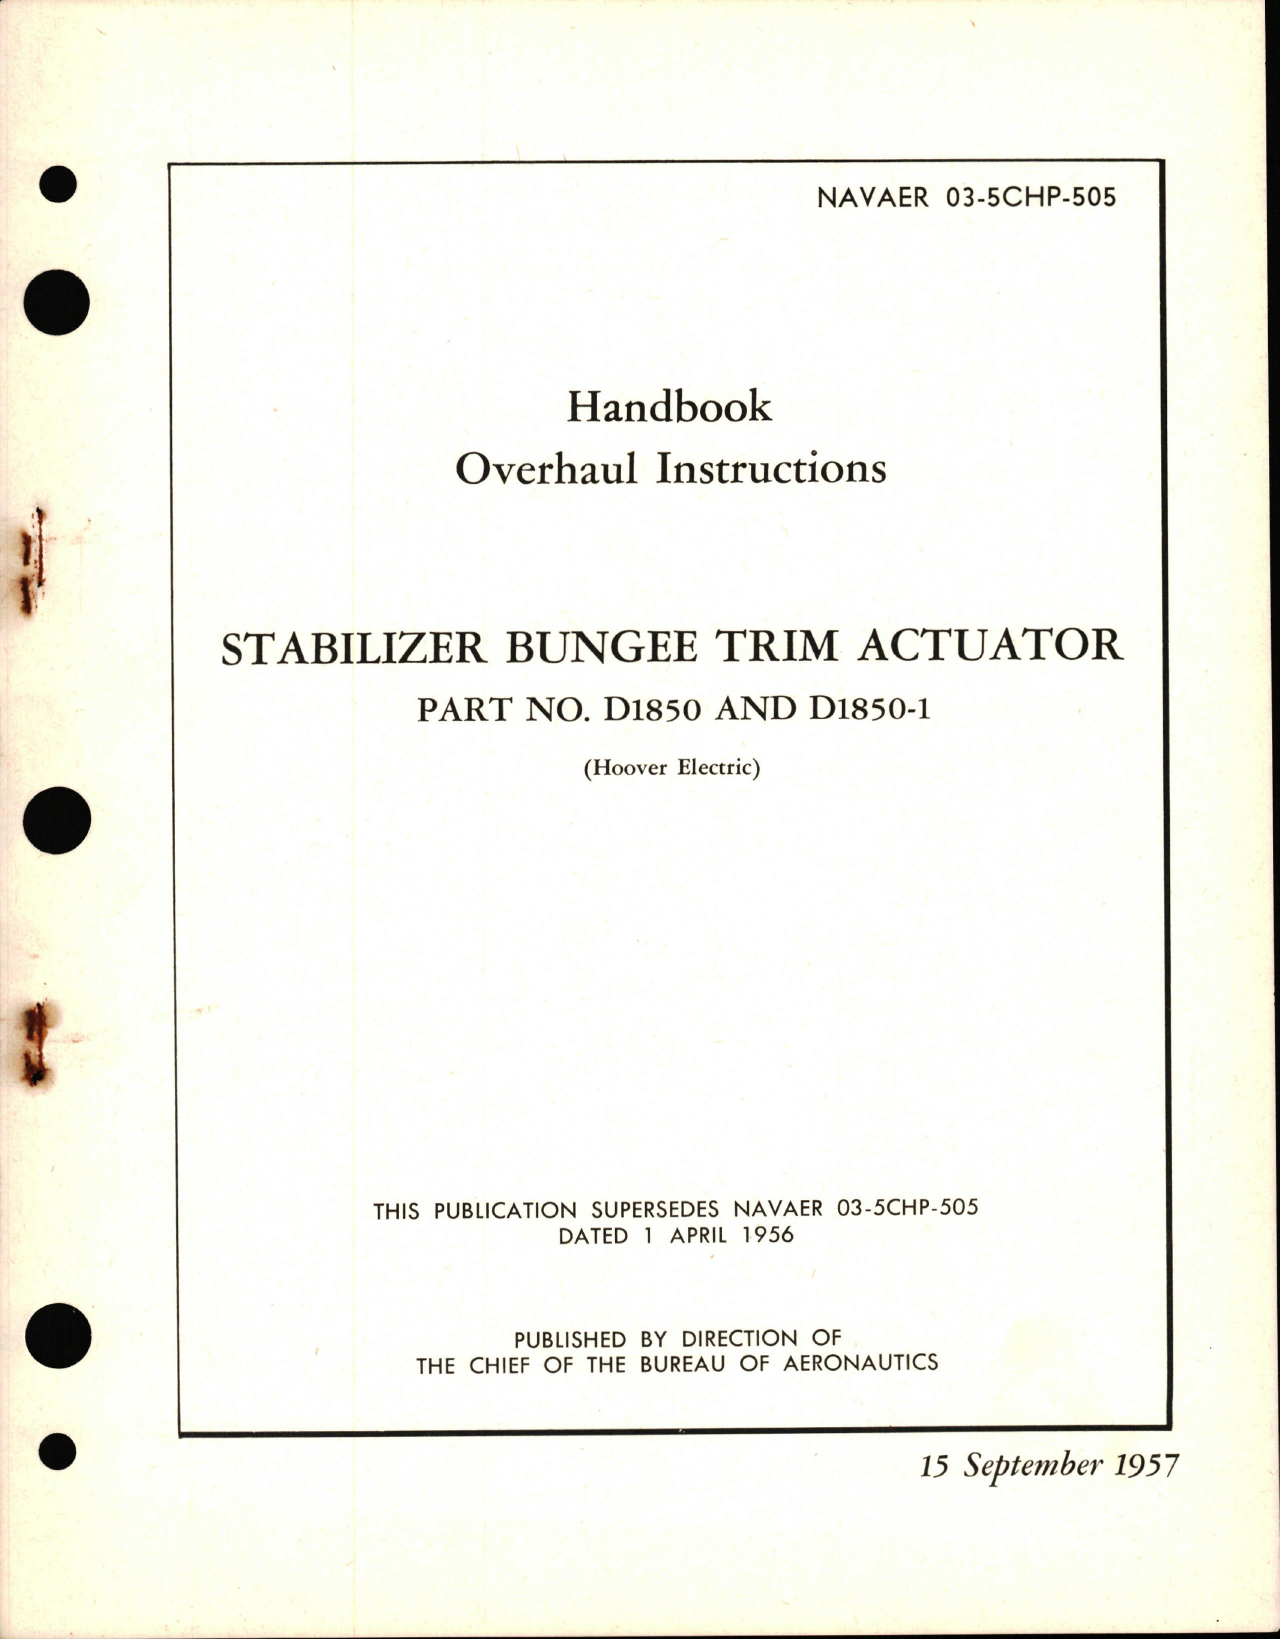 Sample page 1 from AirCorps Library document: Overhaul Instructions for Stabilizer Bungee Trim Actuator Part D1850 and D1850-1